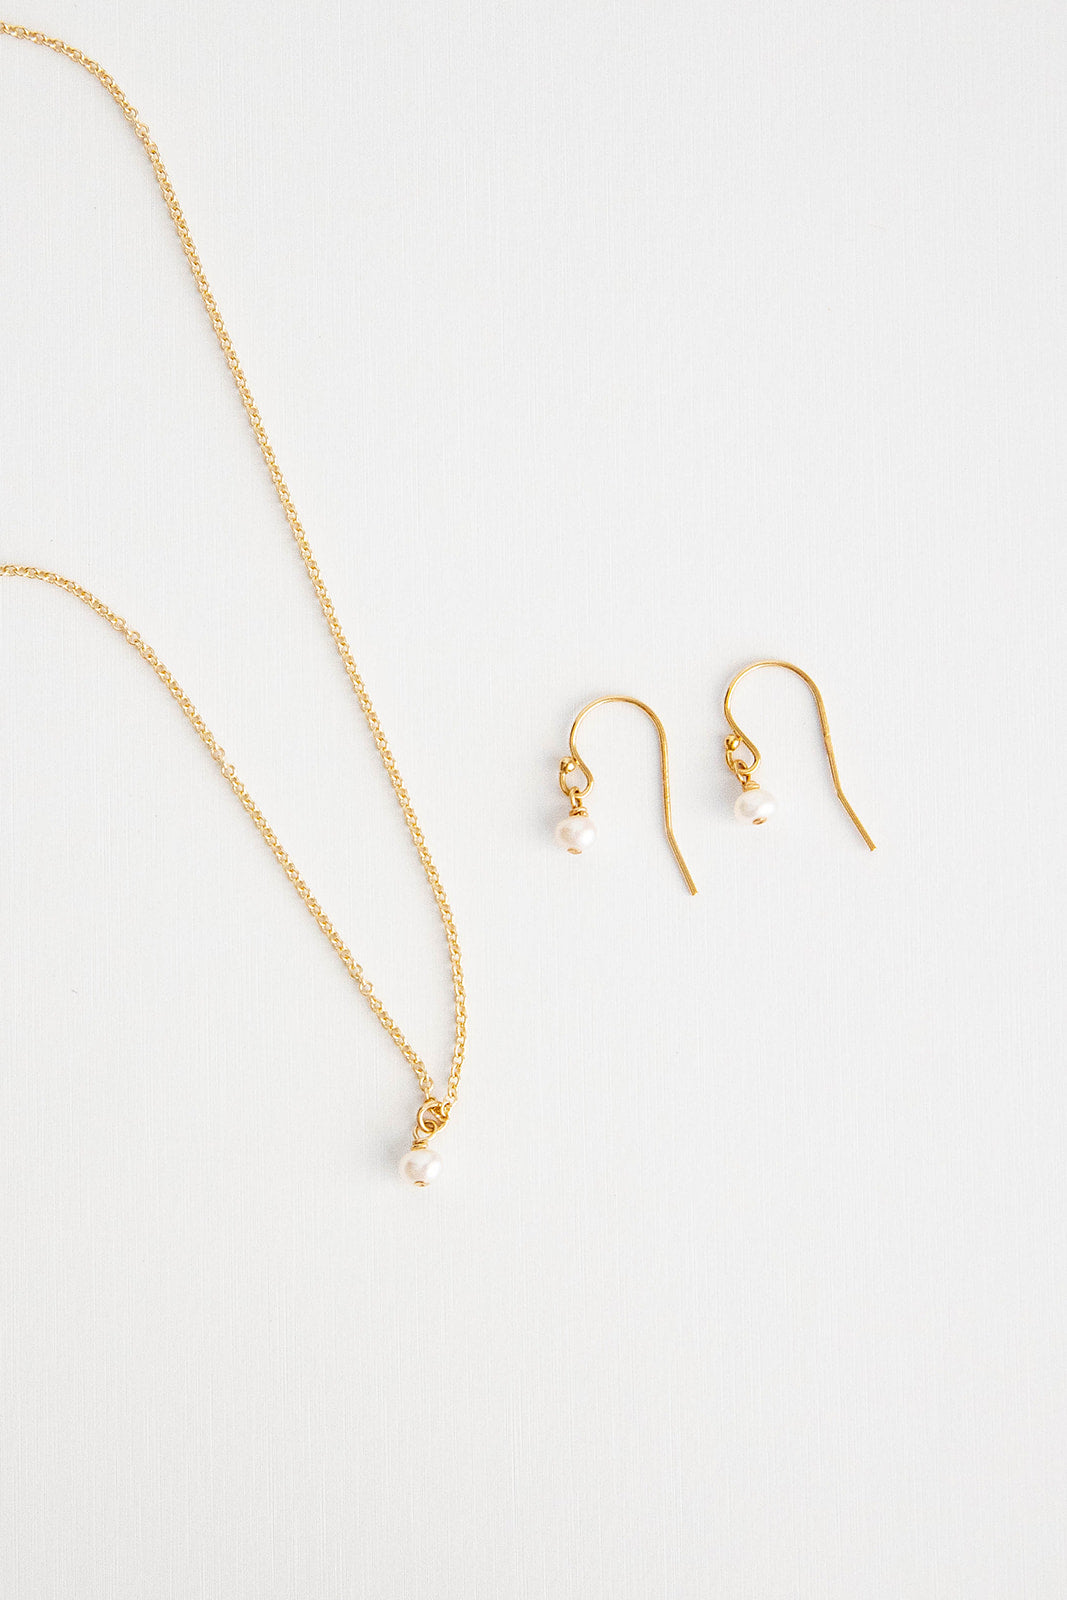 A mini freshwater pearl on a 14k gold filled cable link chain necklace lays next to a pair of matching earrings lays on a white background.